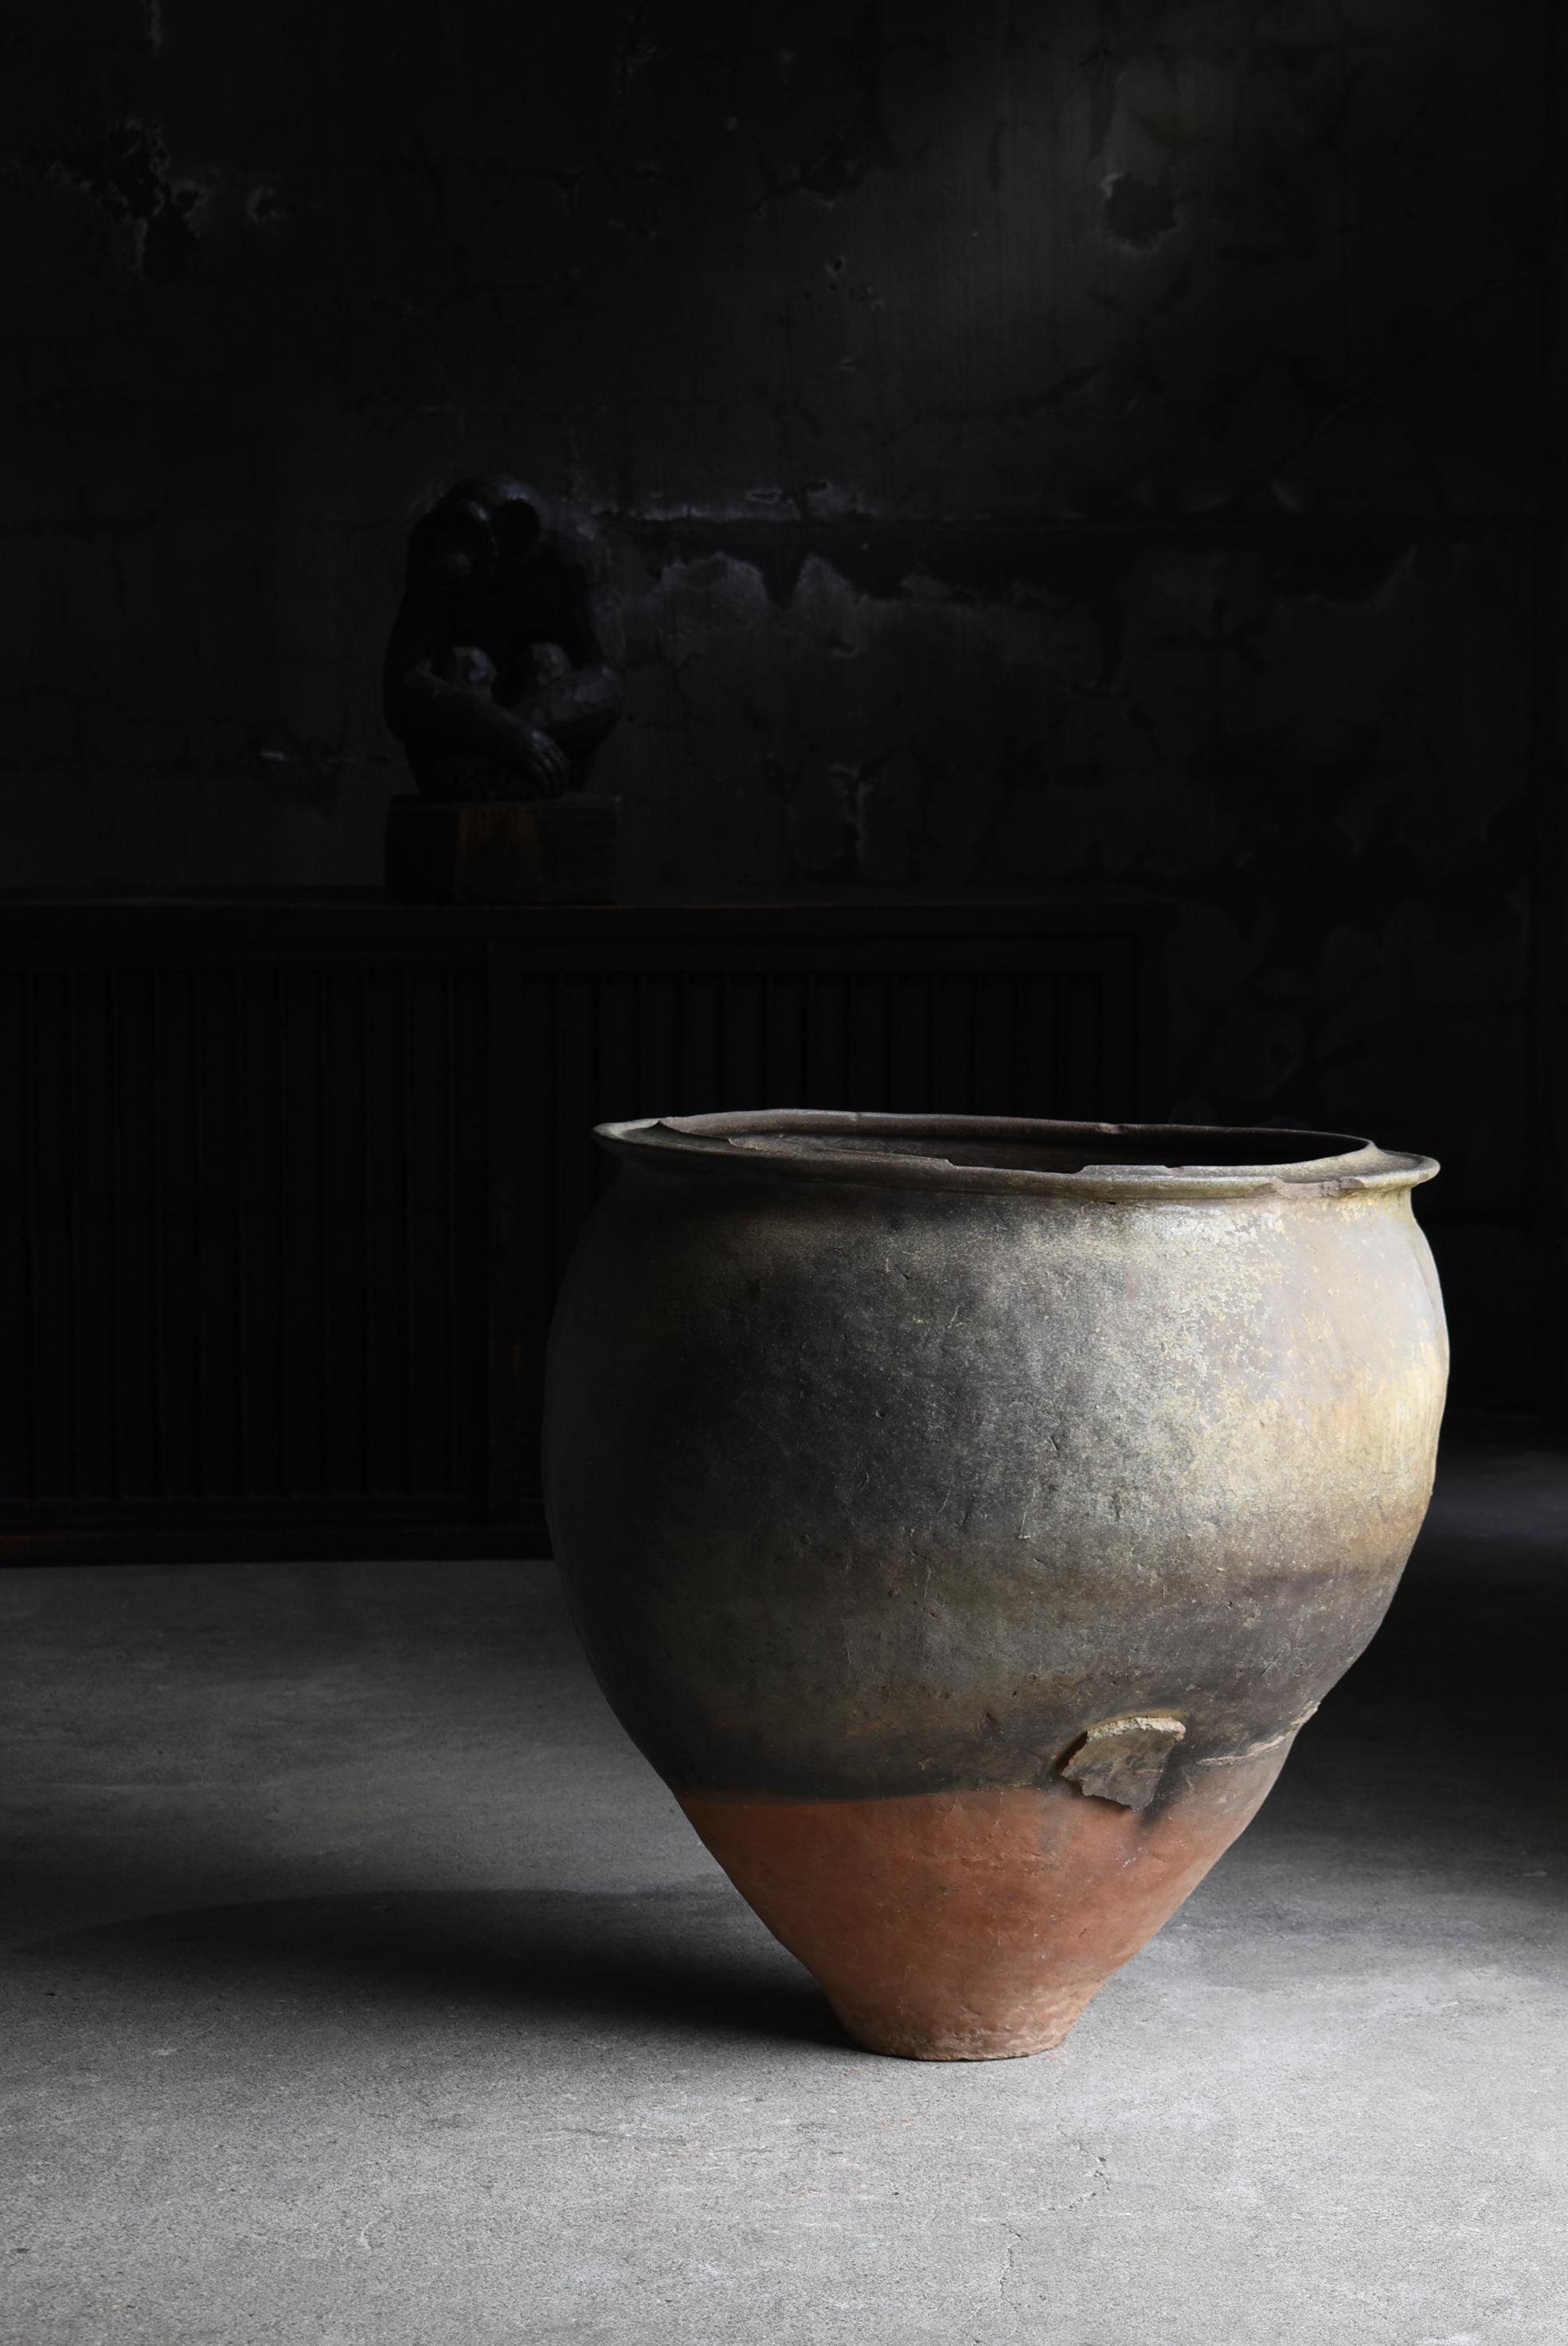 This is a very huge Pottery vase made in Japan.
In Japan, it is called 